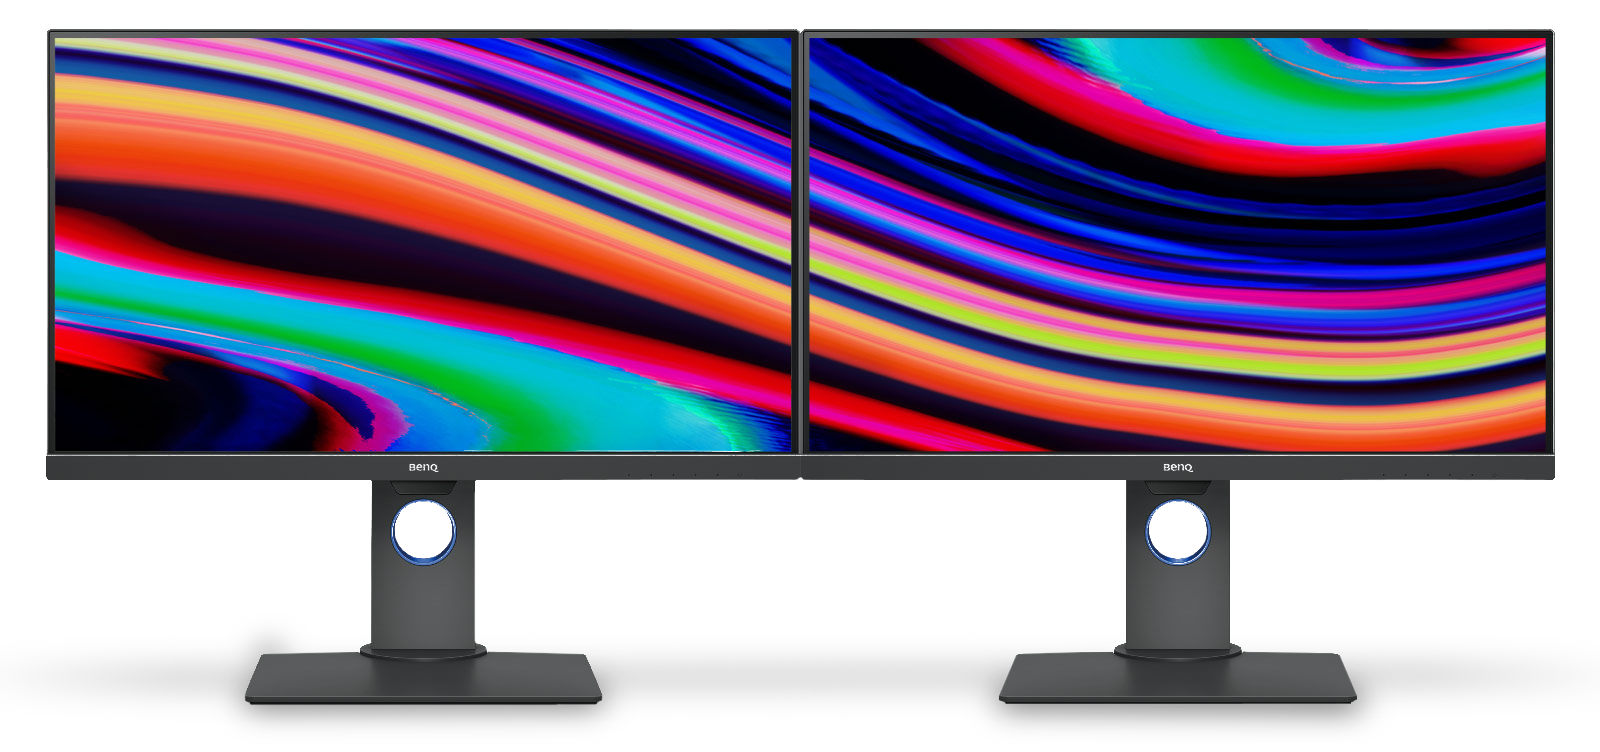 BenQ color consistency technology ensures that colors on every PD2705Q look virtually identical.